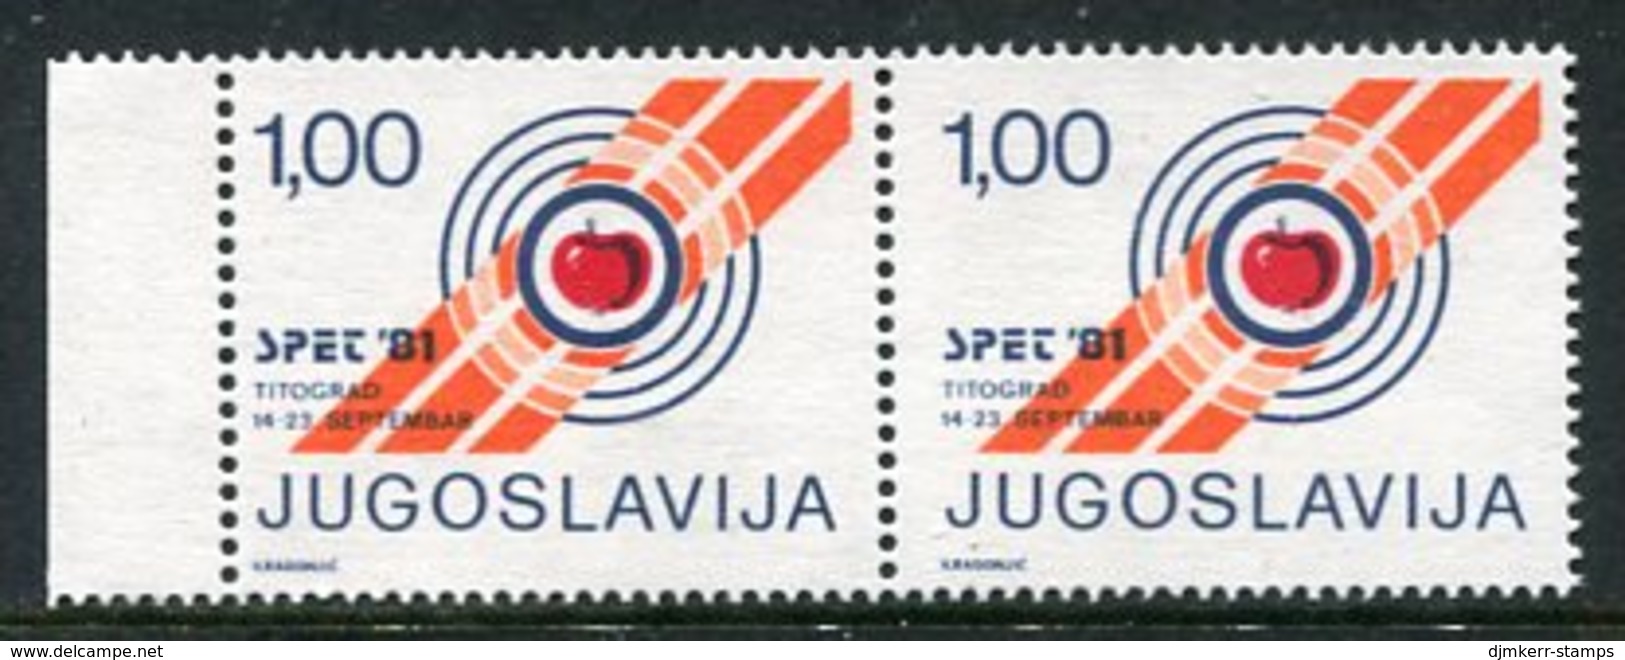 YUGOSLAVIA 1981 SPET '81 European Shooting Championship Tax Stamp, Marginal Pair With Variety MNH / ** - Charity Issues